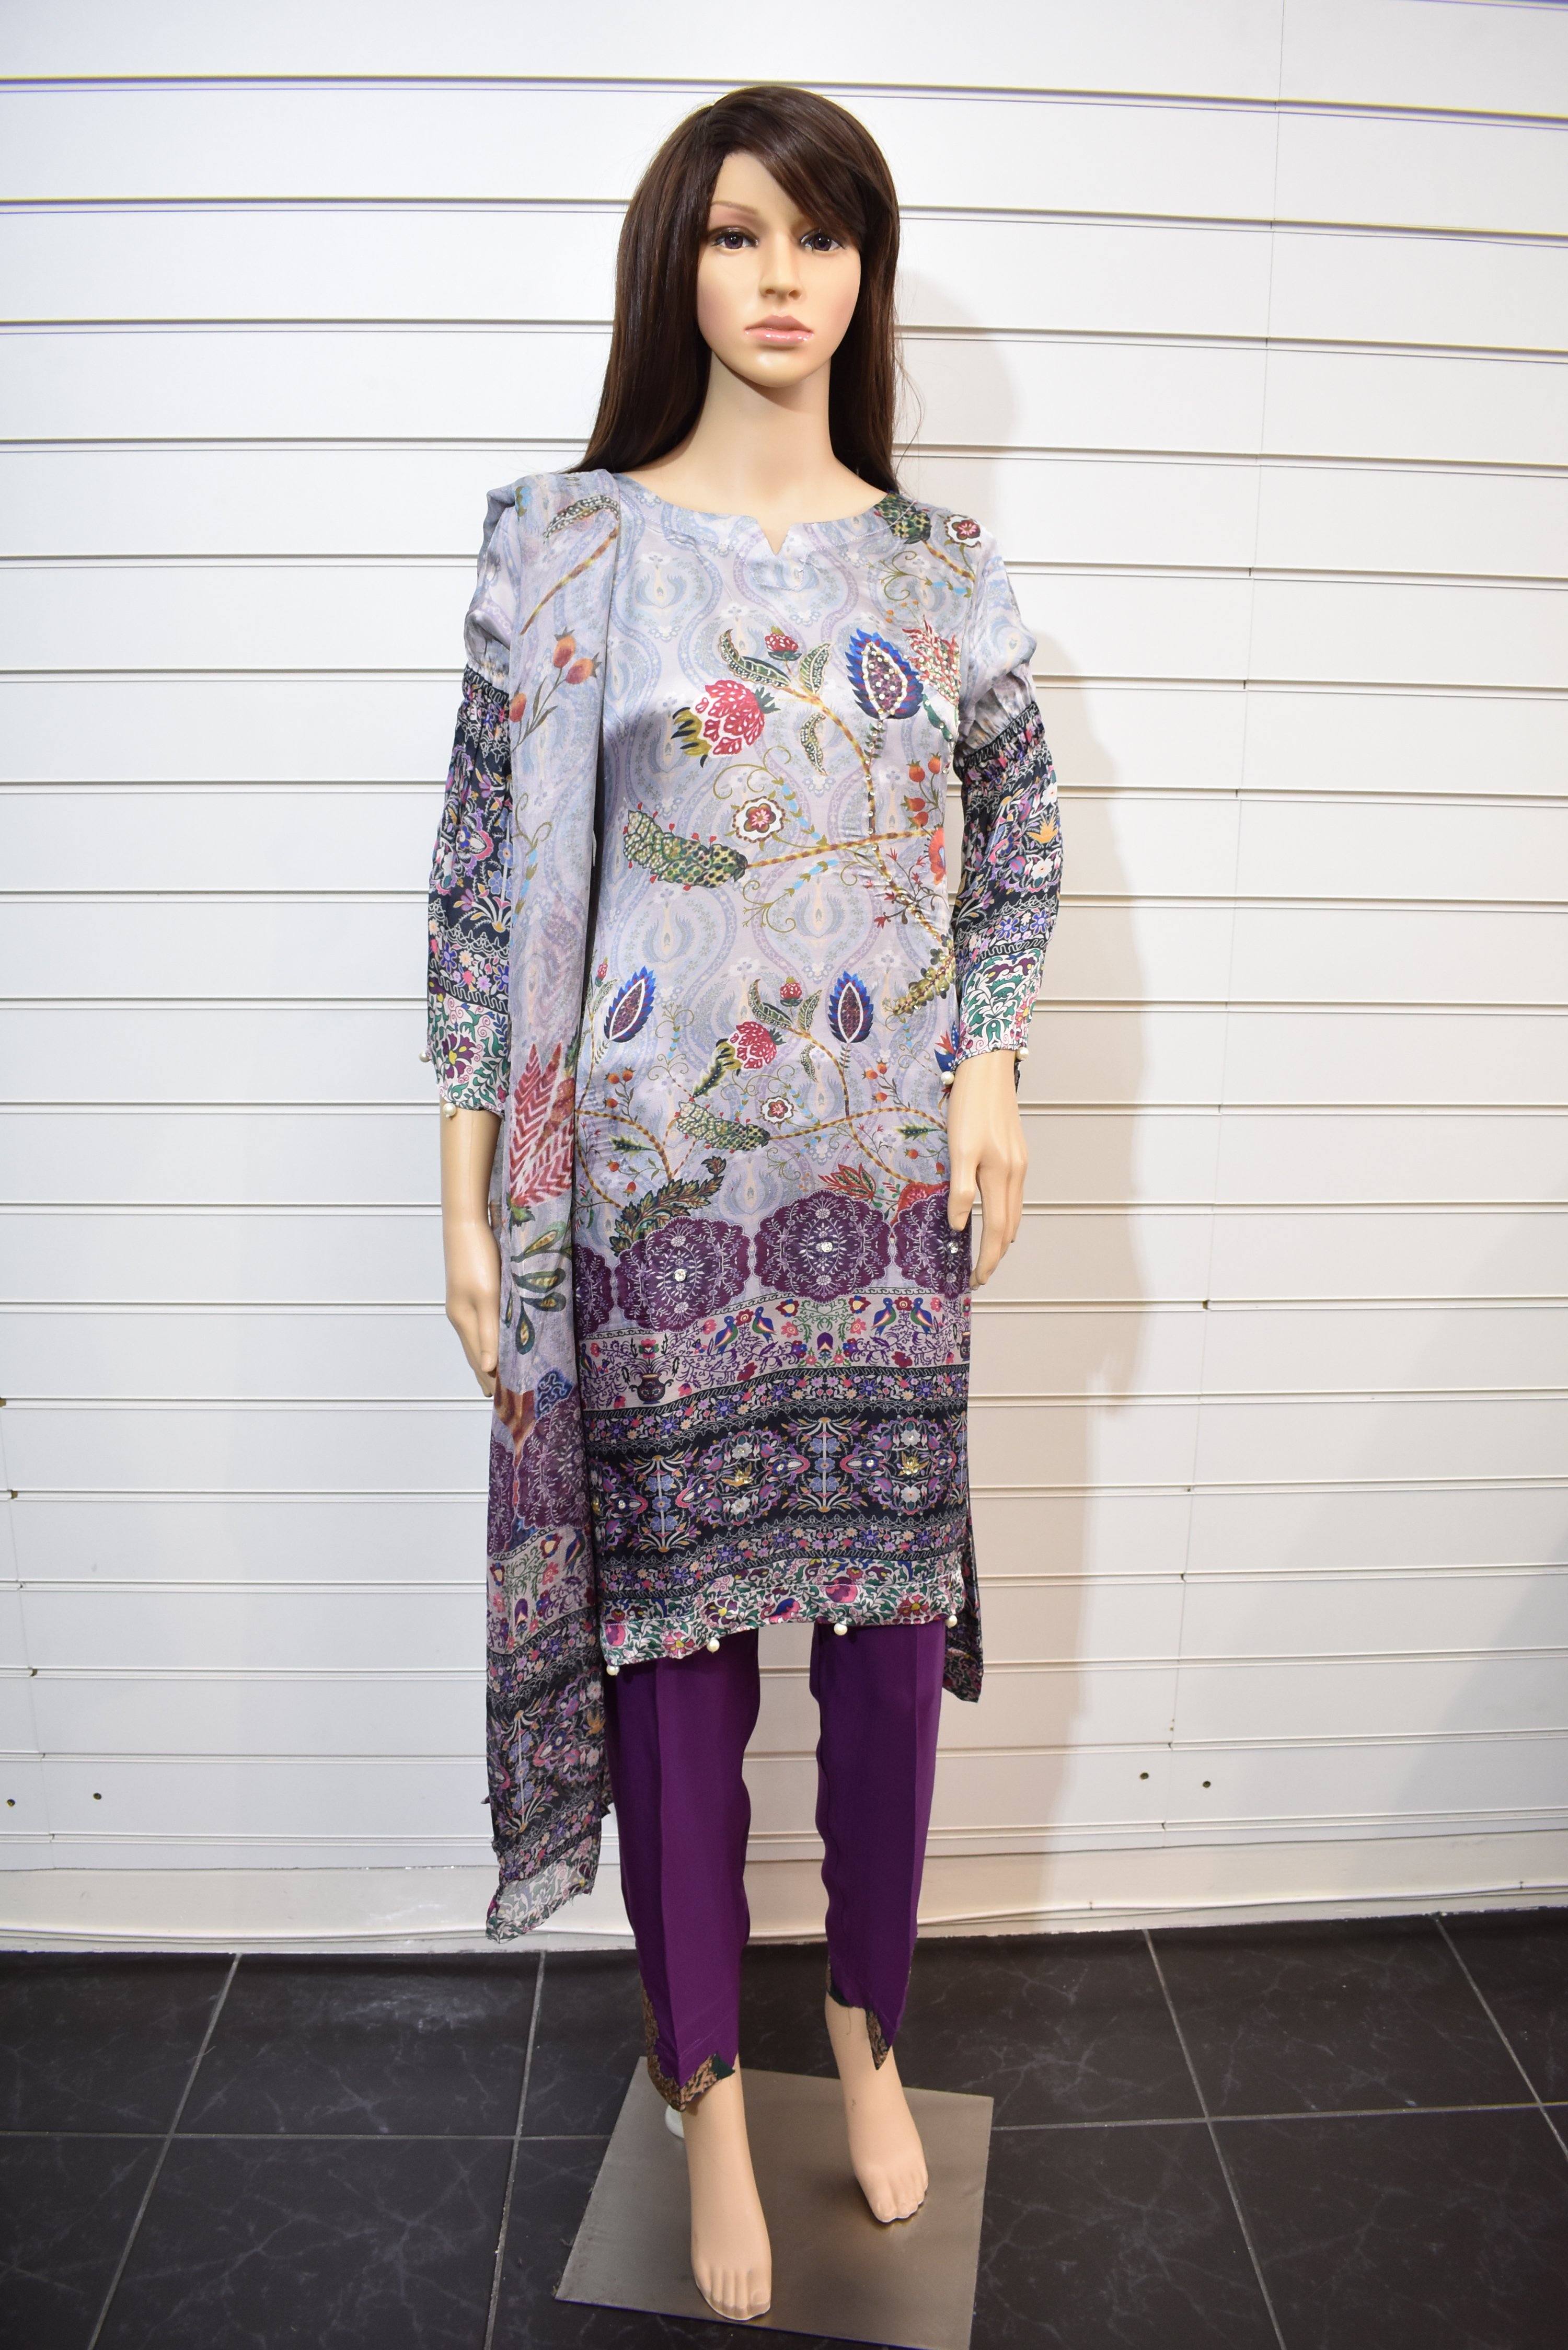 Chamois Silk Digital Print Eid Outfit with Embroidered Capri Trousers - Desi Posh